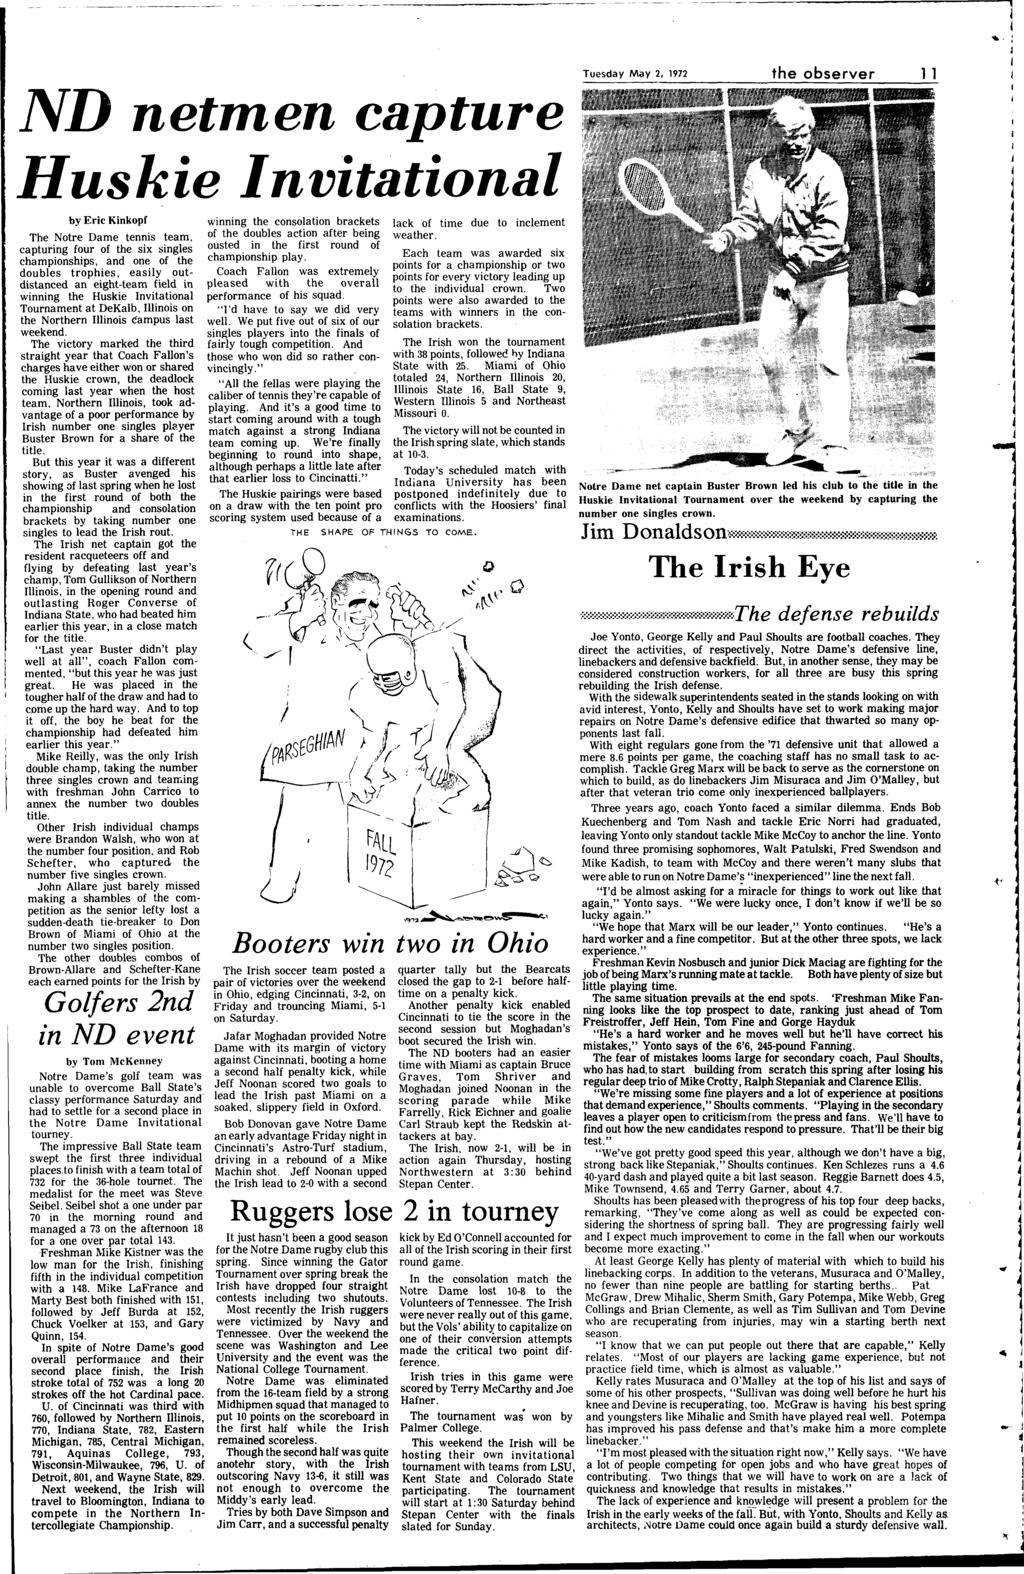 -------------------- Tuesday May 2, 1972 1 1 ND netmen capture Huskie Invitational by Eric Kinkopf The Notre Dame tennis team, capturing four of the six singles championships, and one of the doubles